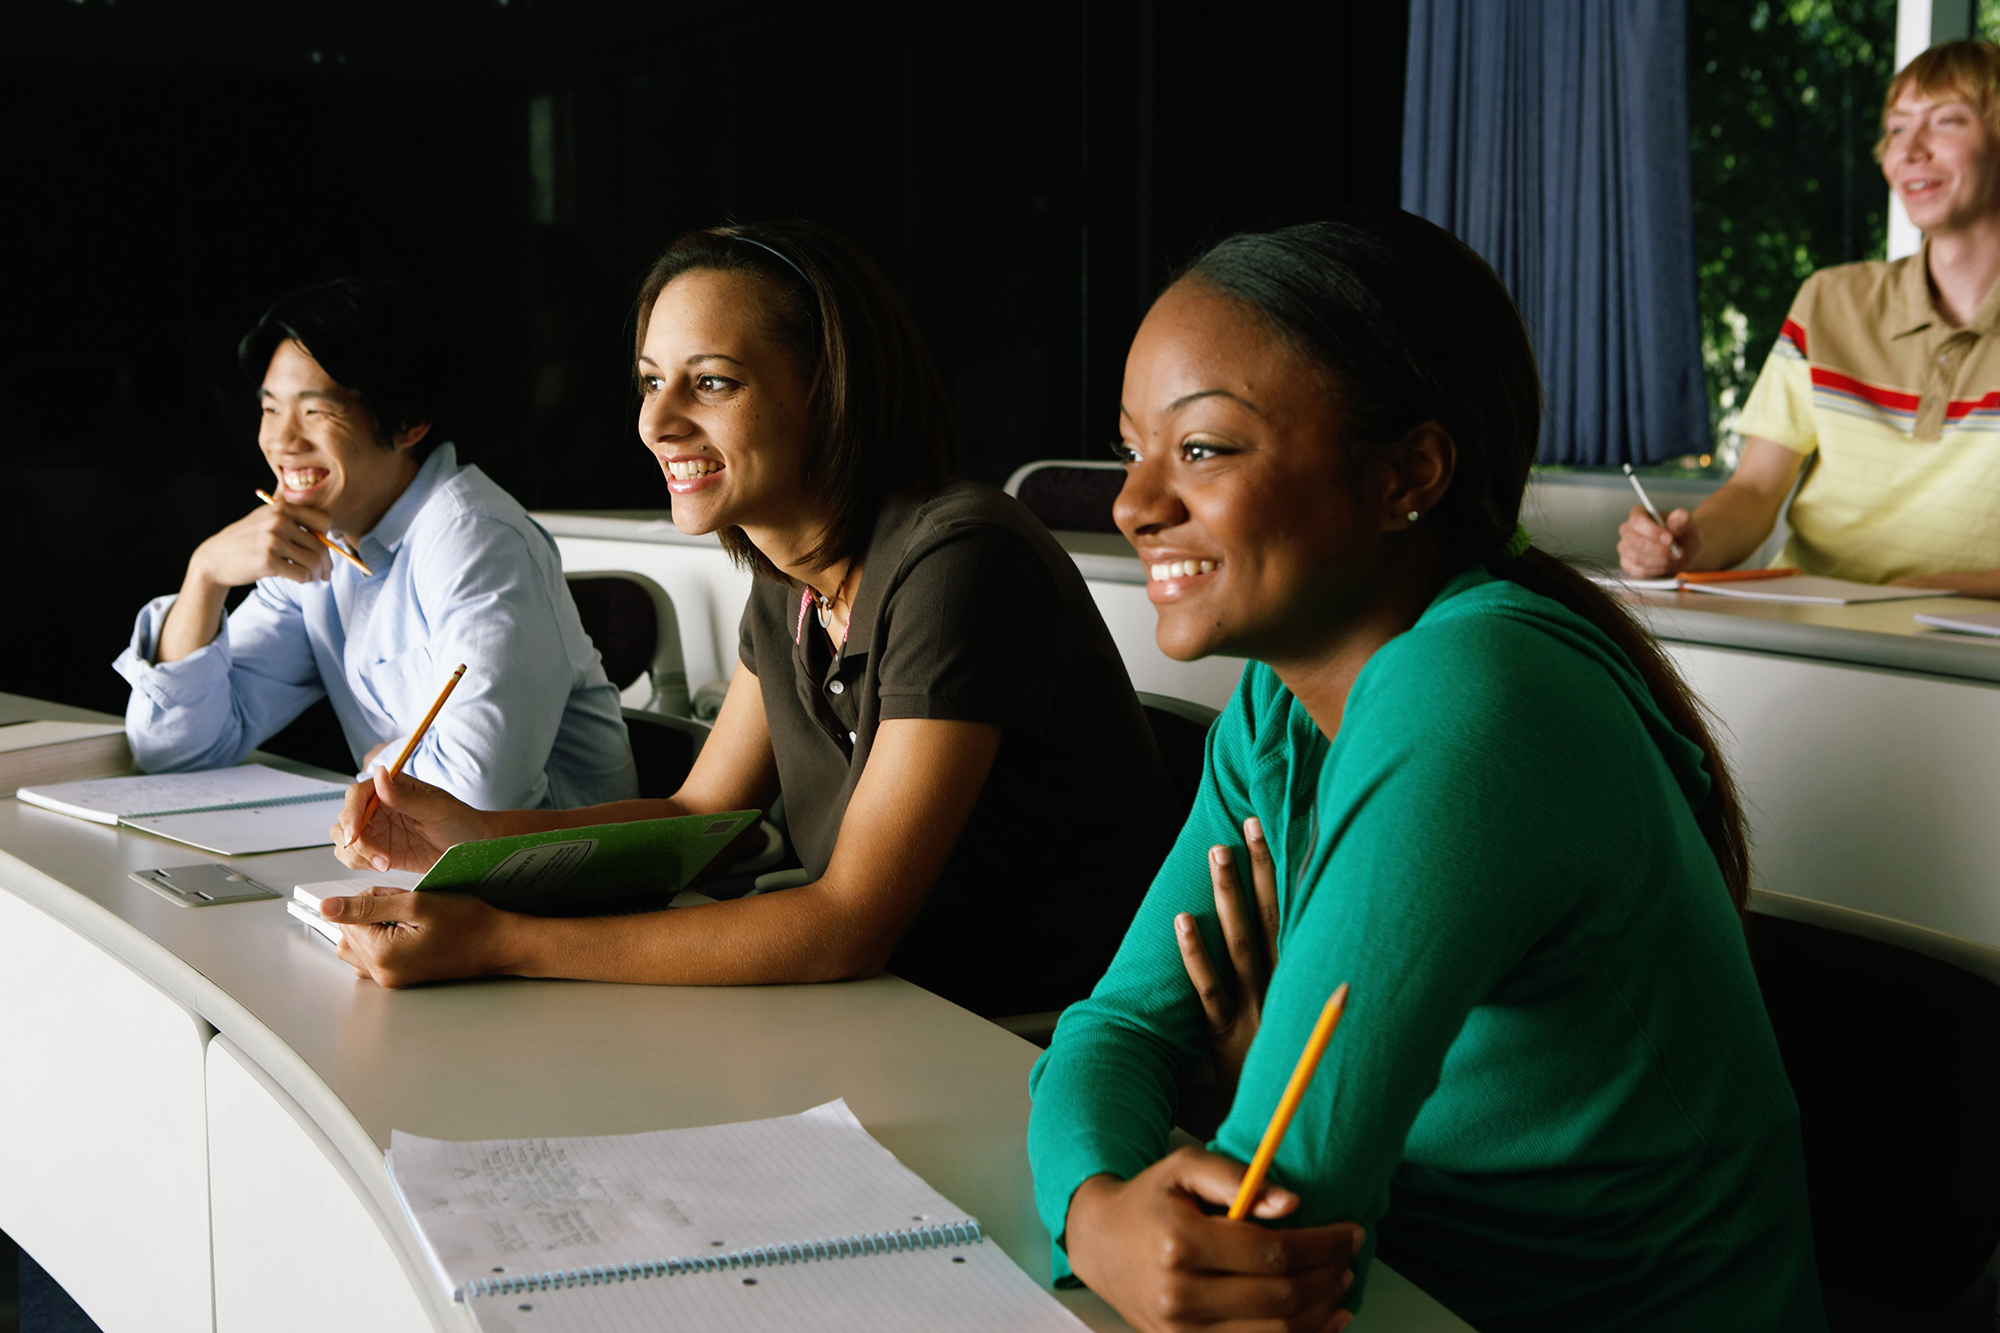 Four students smiling in a lecture hall setting